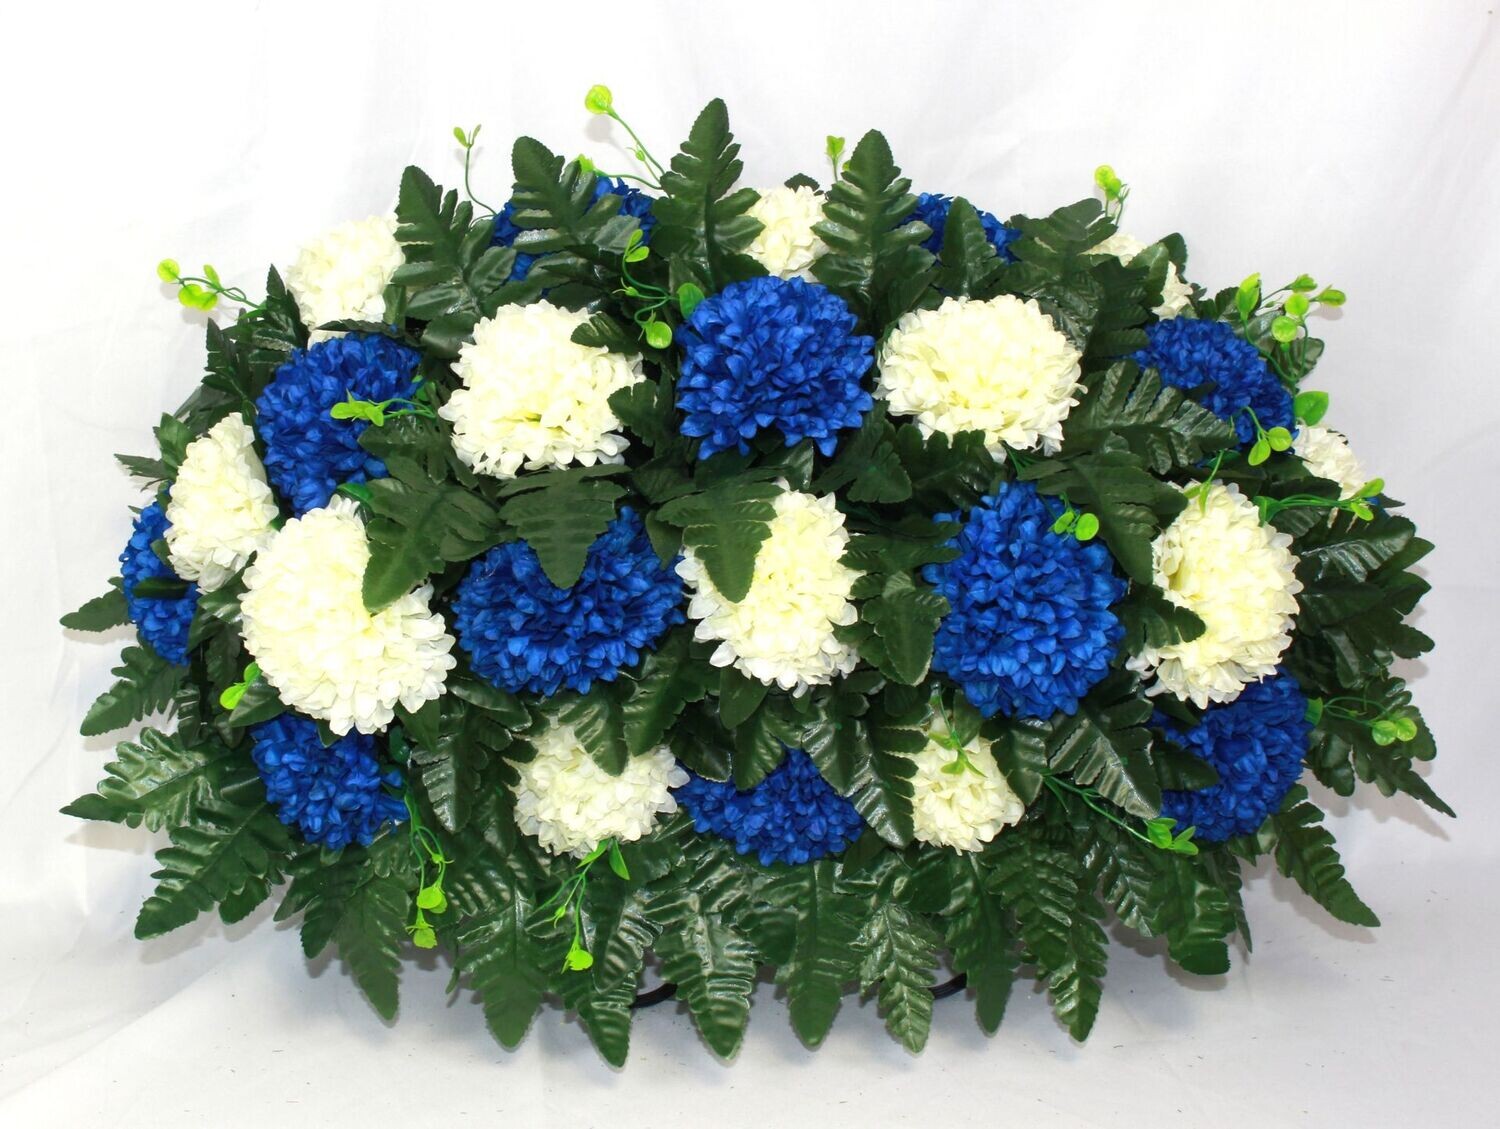 Crazyboutdeco Cemetery Flowers -XL Blue and Creme Carnation Cemetery  Arrangements - Artificial Flowers for Gravesite -Cemetery Headstone Saddle